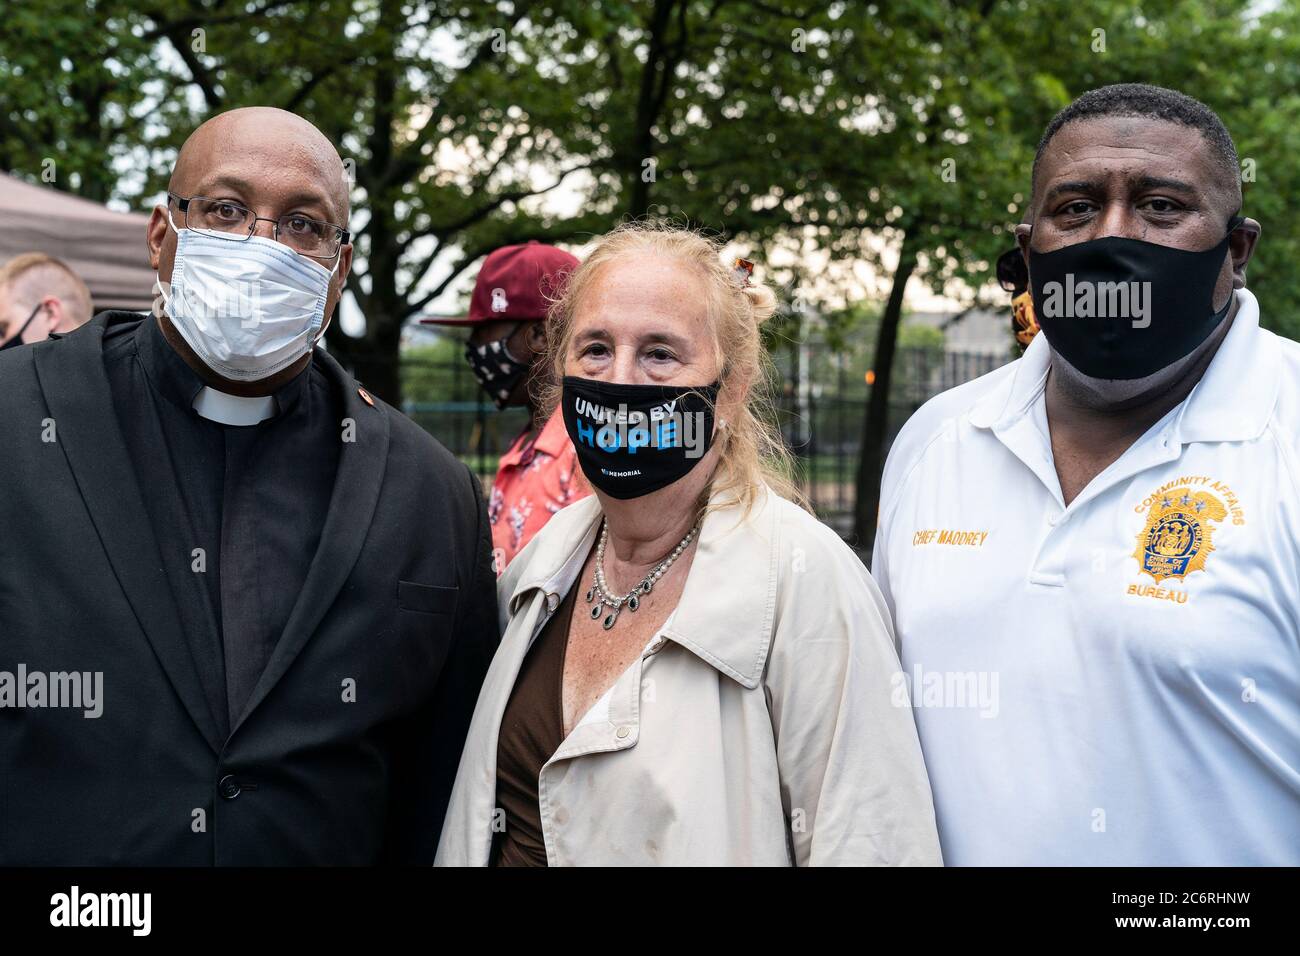 New York, United States. 11th July, 2020. Chaplain Robert Rice, Gale Brewer, NYPD Chief Jeffrey Maddrey attend Occupy the Corner rally in East Harlem in response on gun violence in New York on July 11, 2020. Gun violence in 2020 surged by more than 100% in New York City mostly in neighborhoods with high rate of poverty and high level of COVID-19 cases. Community activists and police department encreased presence in those areas in order to stop gun violence. (Photo by Lev Radin/Sipa USA) Credit: Sipa USA/Alamy Live News Stock Photo